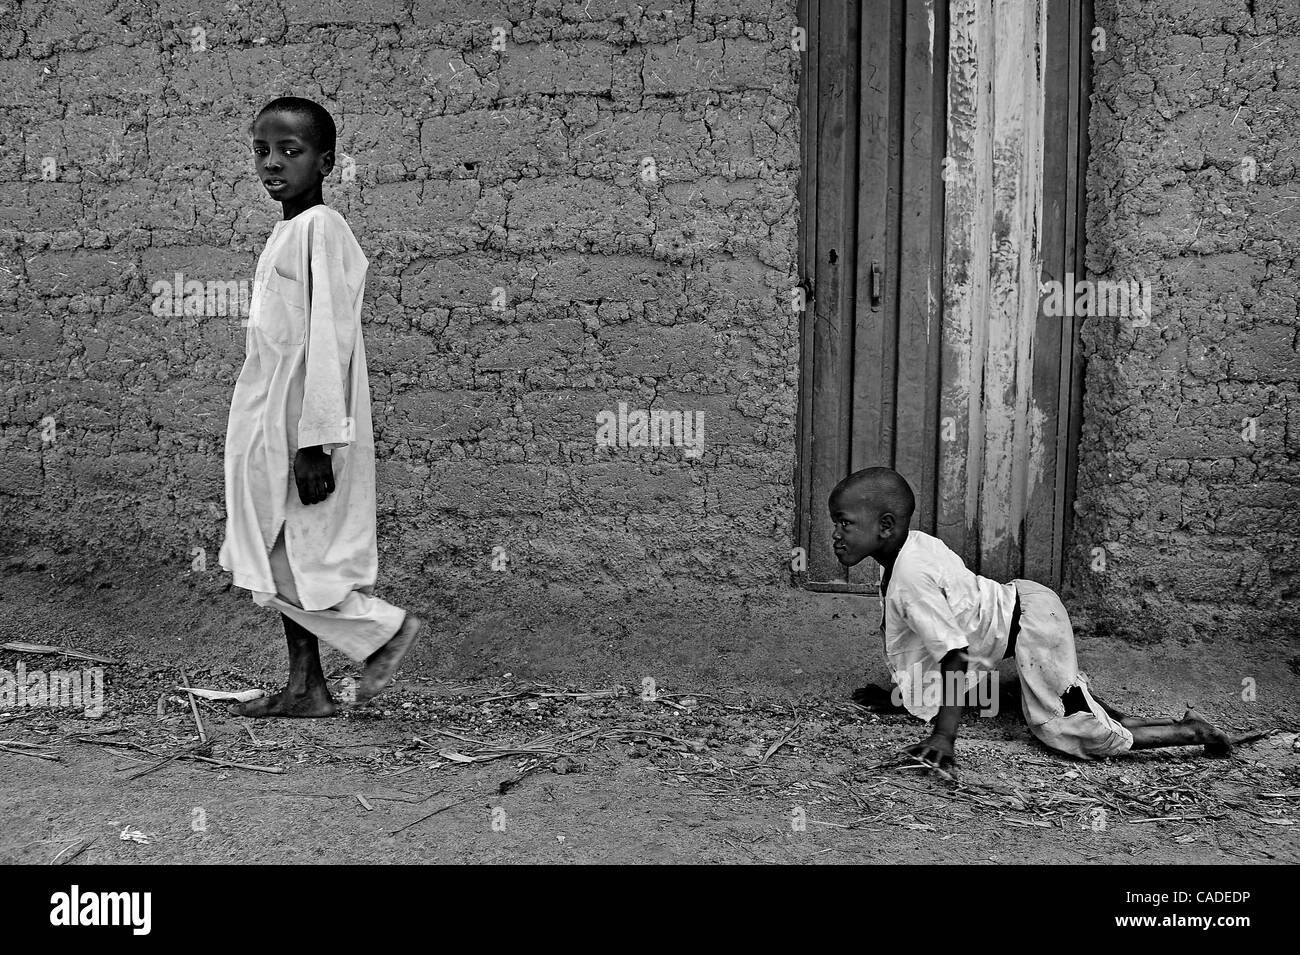 Sept. 20, 2010 - Rimin-Gado, KANO, NIGERIA - Polio victim Abubakar, 6, right, follows a boy in his neighborhood near Kano, Nigeria. Religious zealotry and misinformation have coerced villagers in the Muslim north of Nigeria into refusing polio vaccinations and led to the reemergence of polio only a  Stock Photo